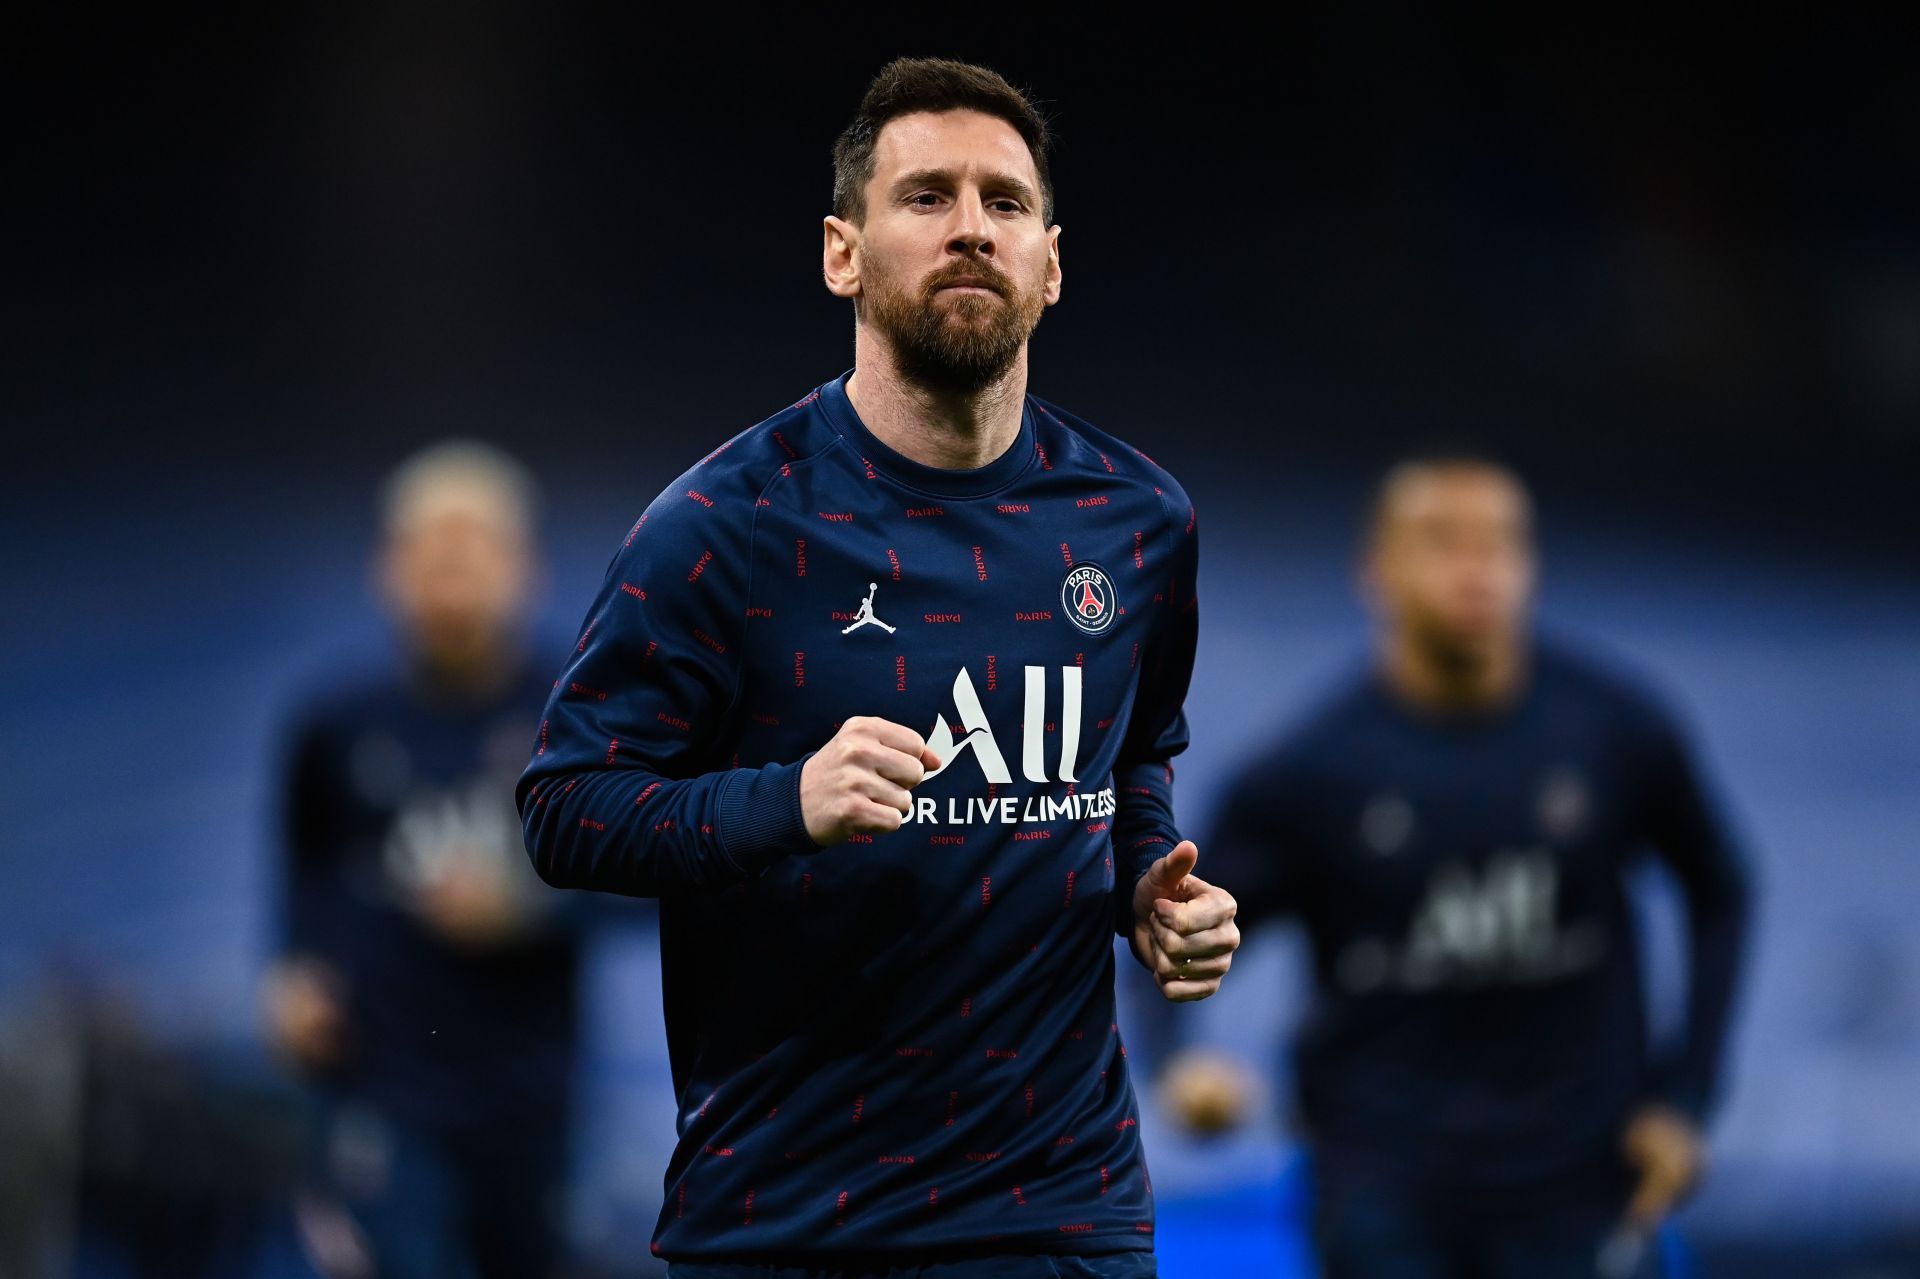 Messi has had a disappointing debut season at the Parc des Princes